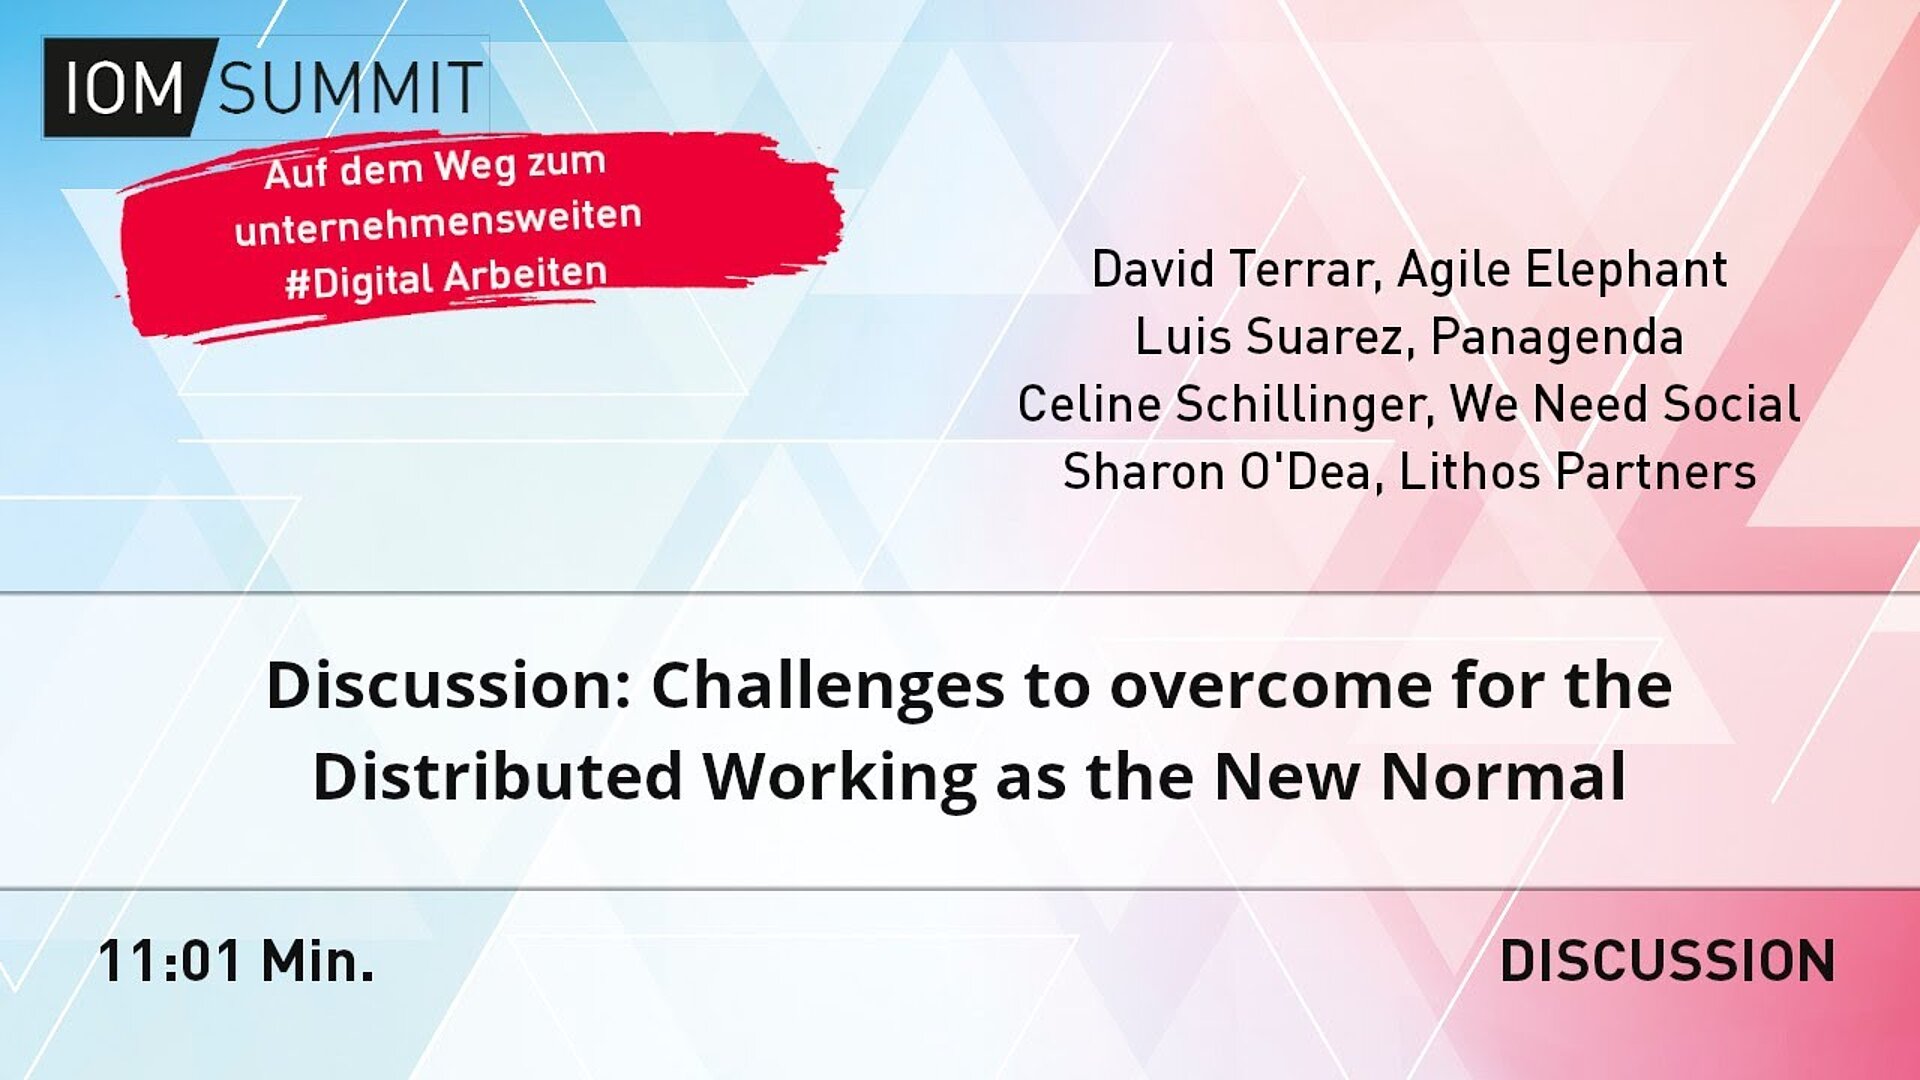 Diskussion: Challenges to overcome for the Distributed Working as the New Normal